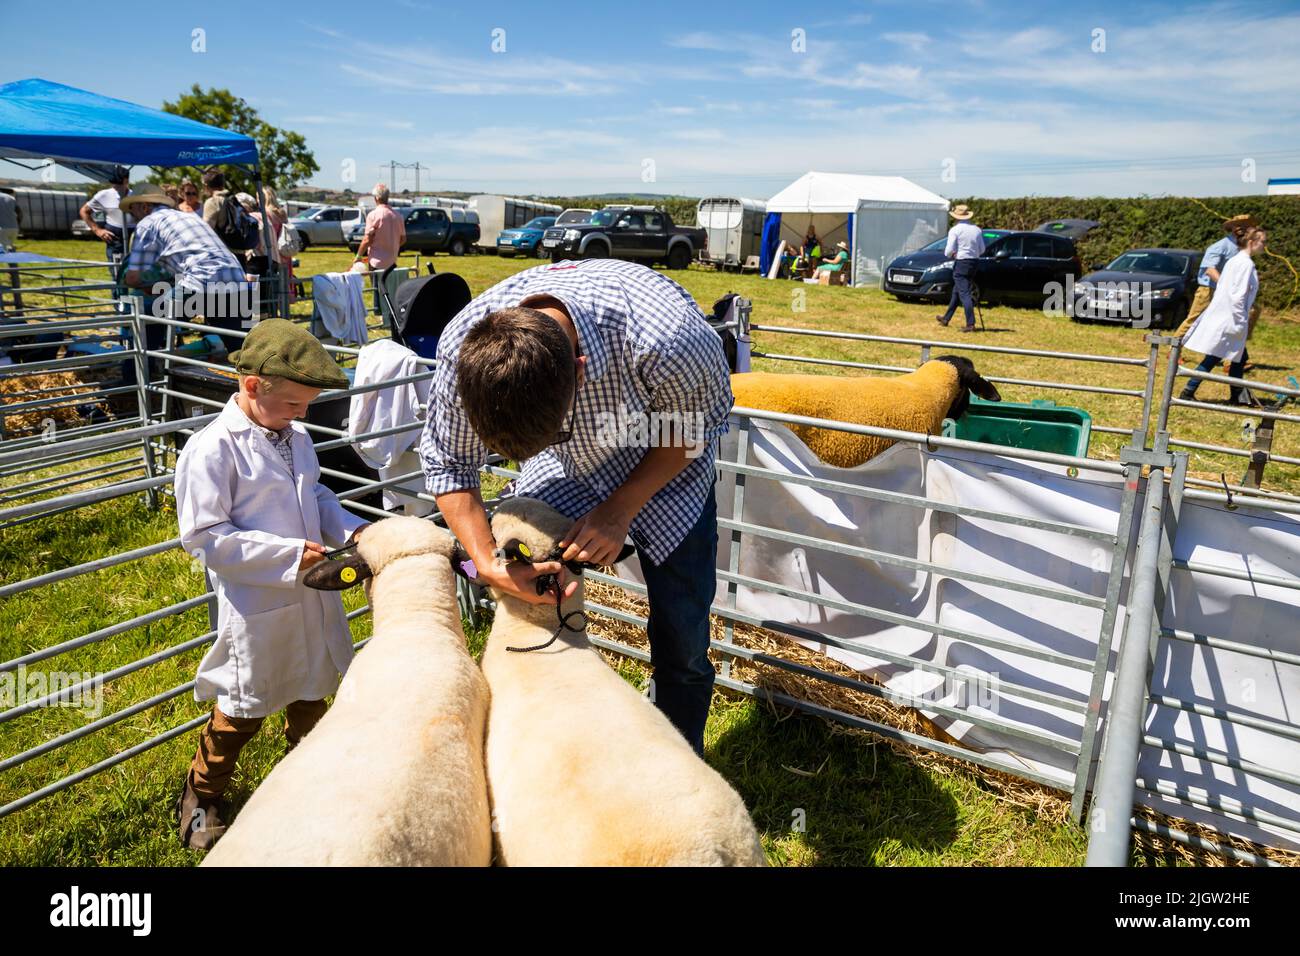 Sheep on show at Stithians Show on a hot sunny day Stock Photo